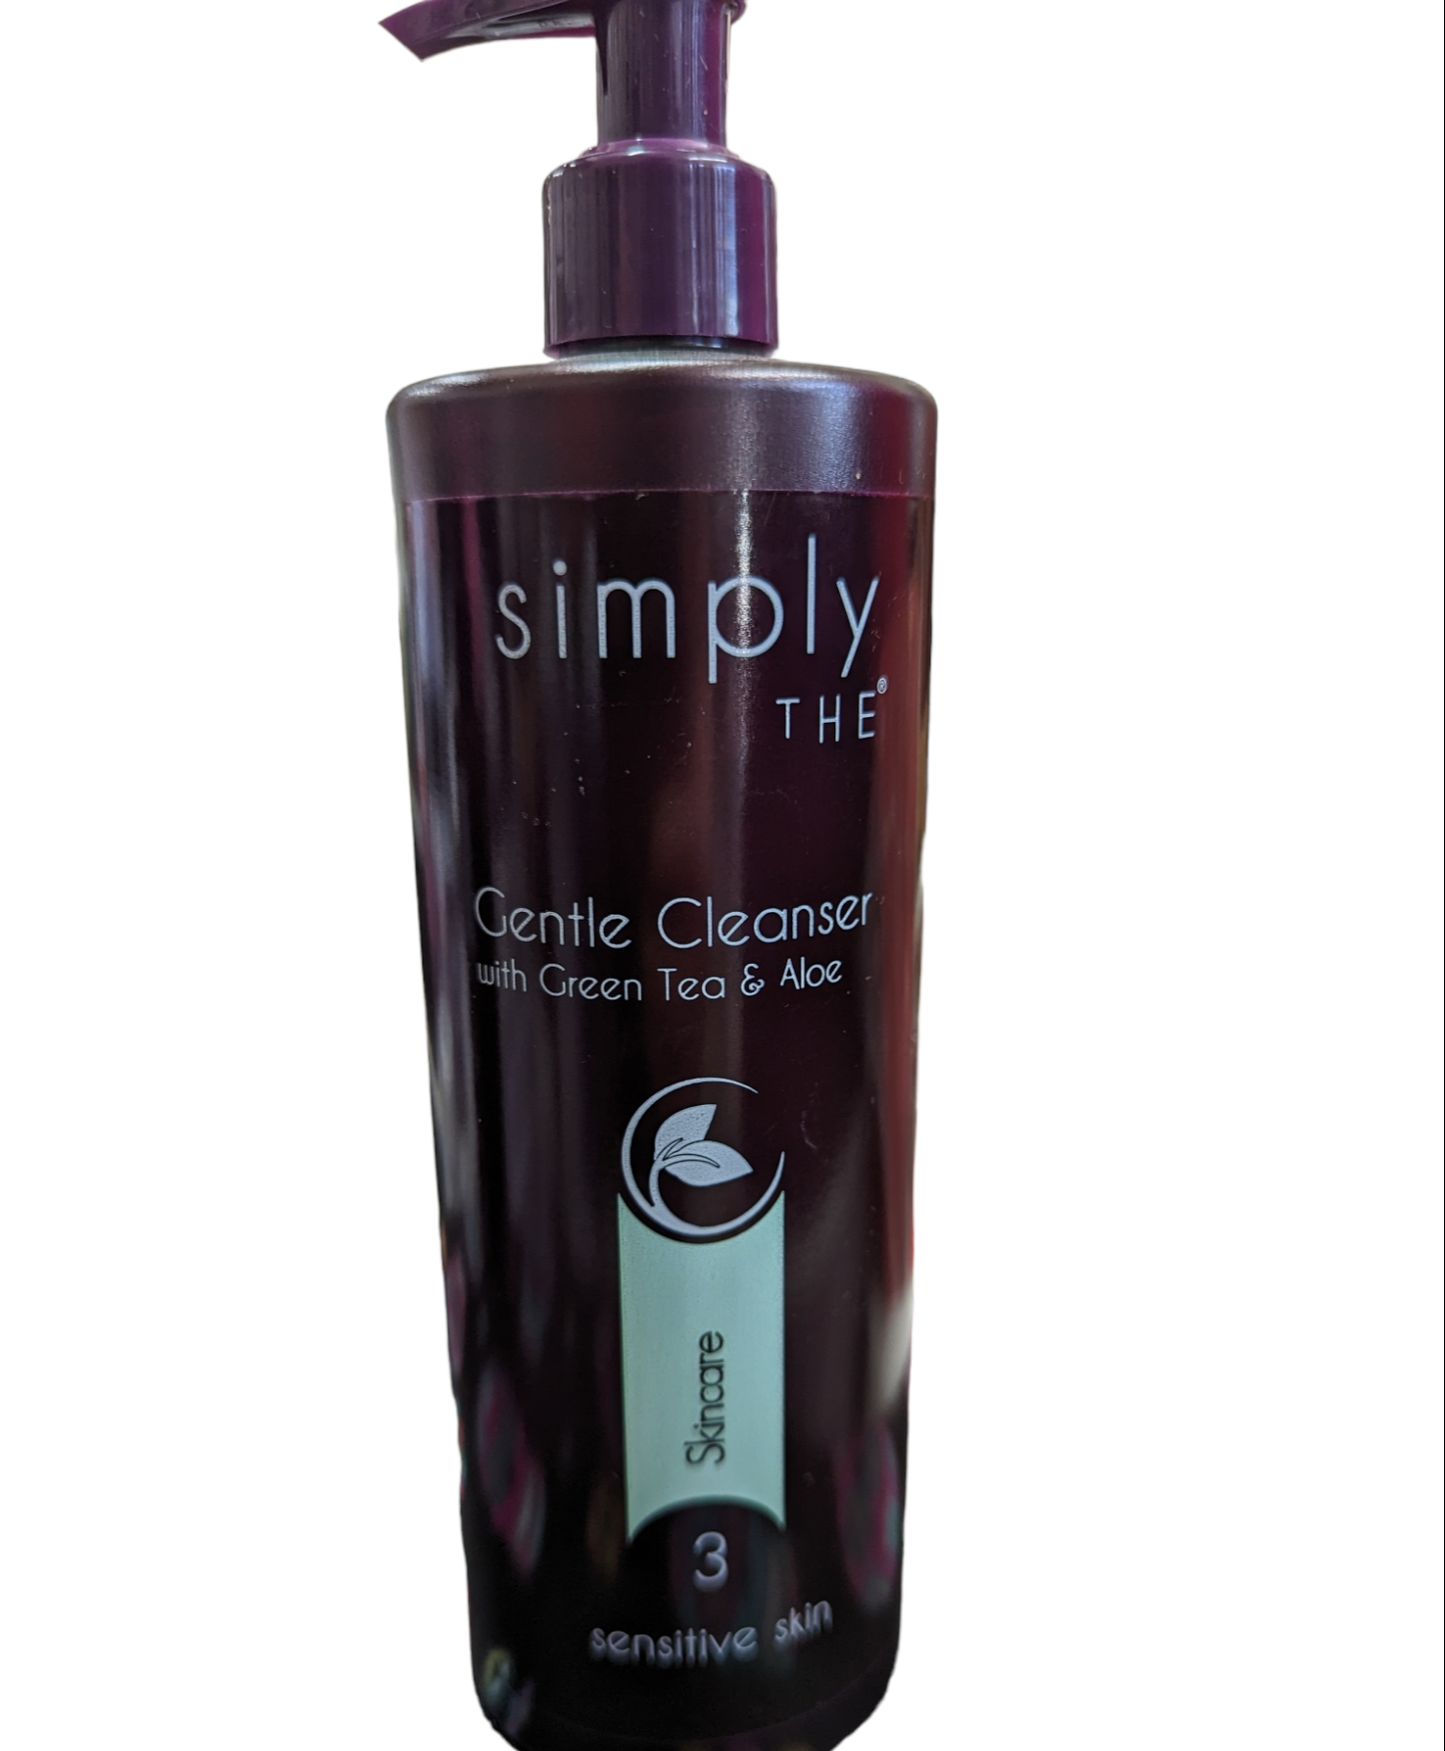 Simply The Sensitive skin Cleanser